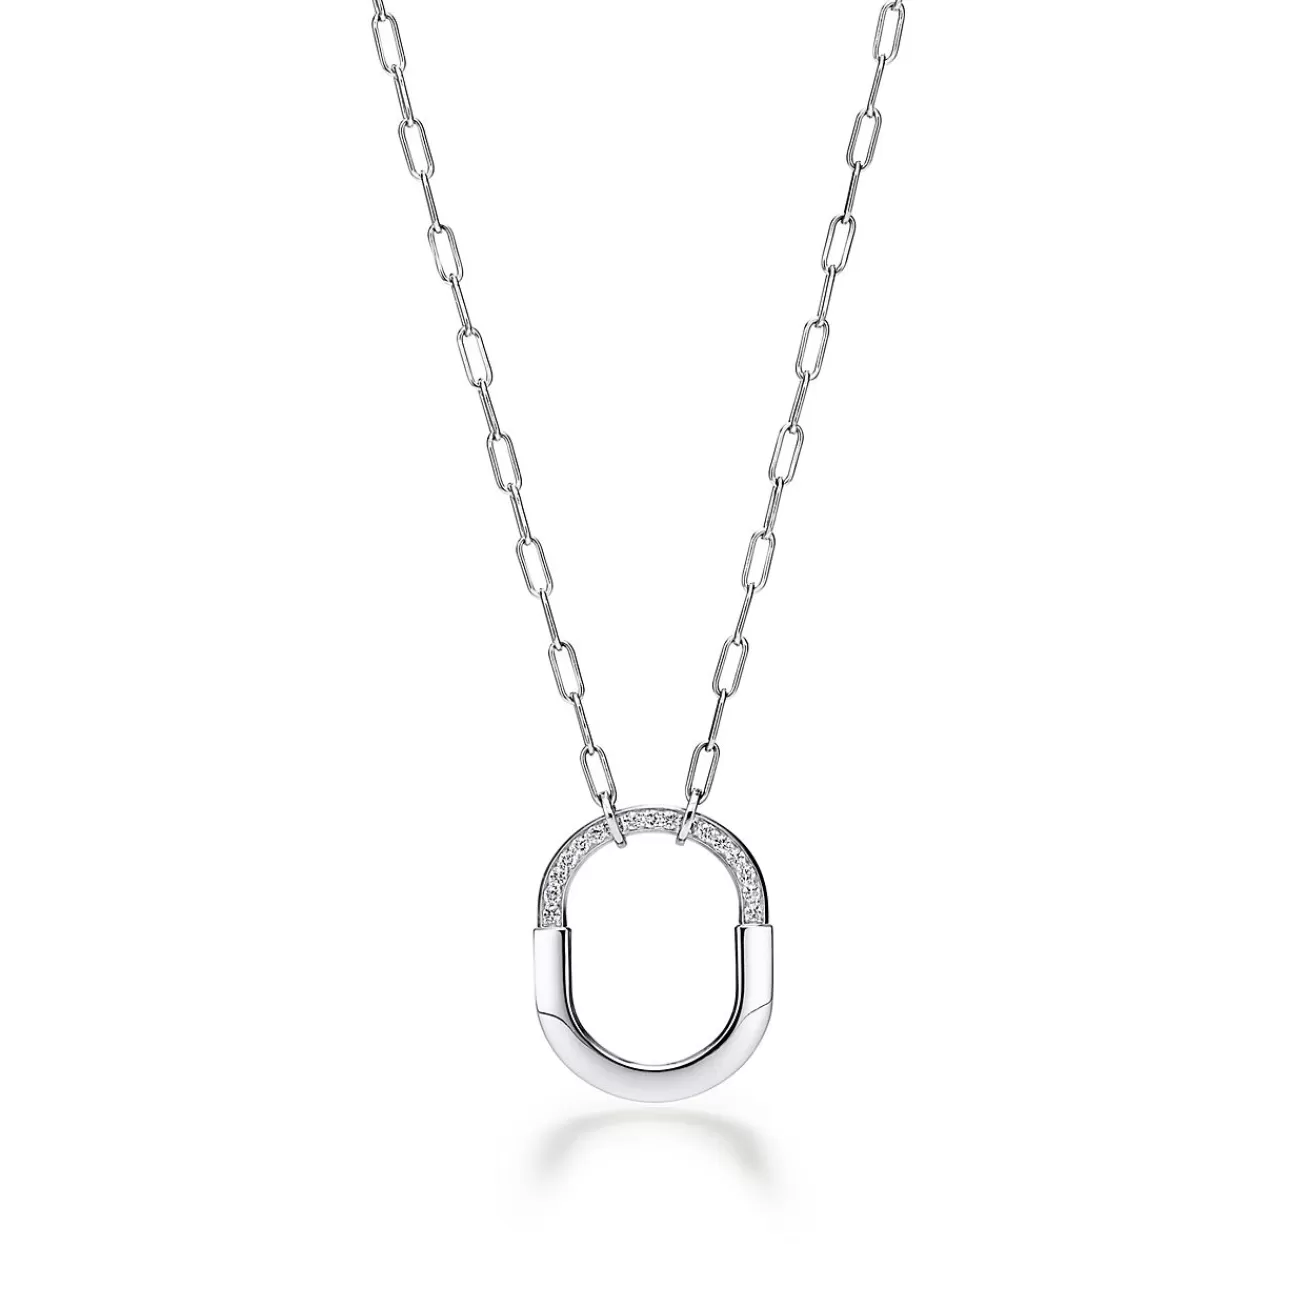 Tiffany & Co. Tiffany Lock Pendant in White Gold with Diamonds, Medium | ^ Necklaces & Pendants | Gifts for Her